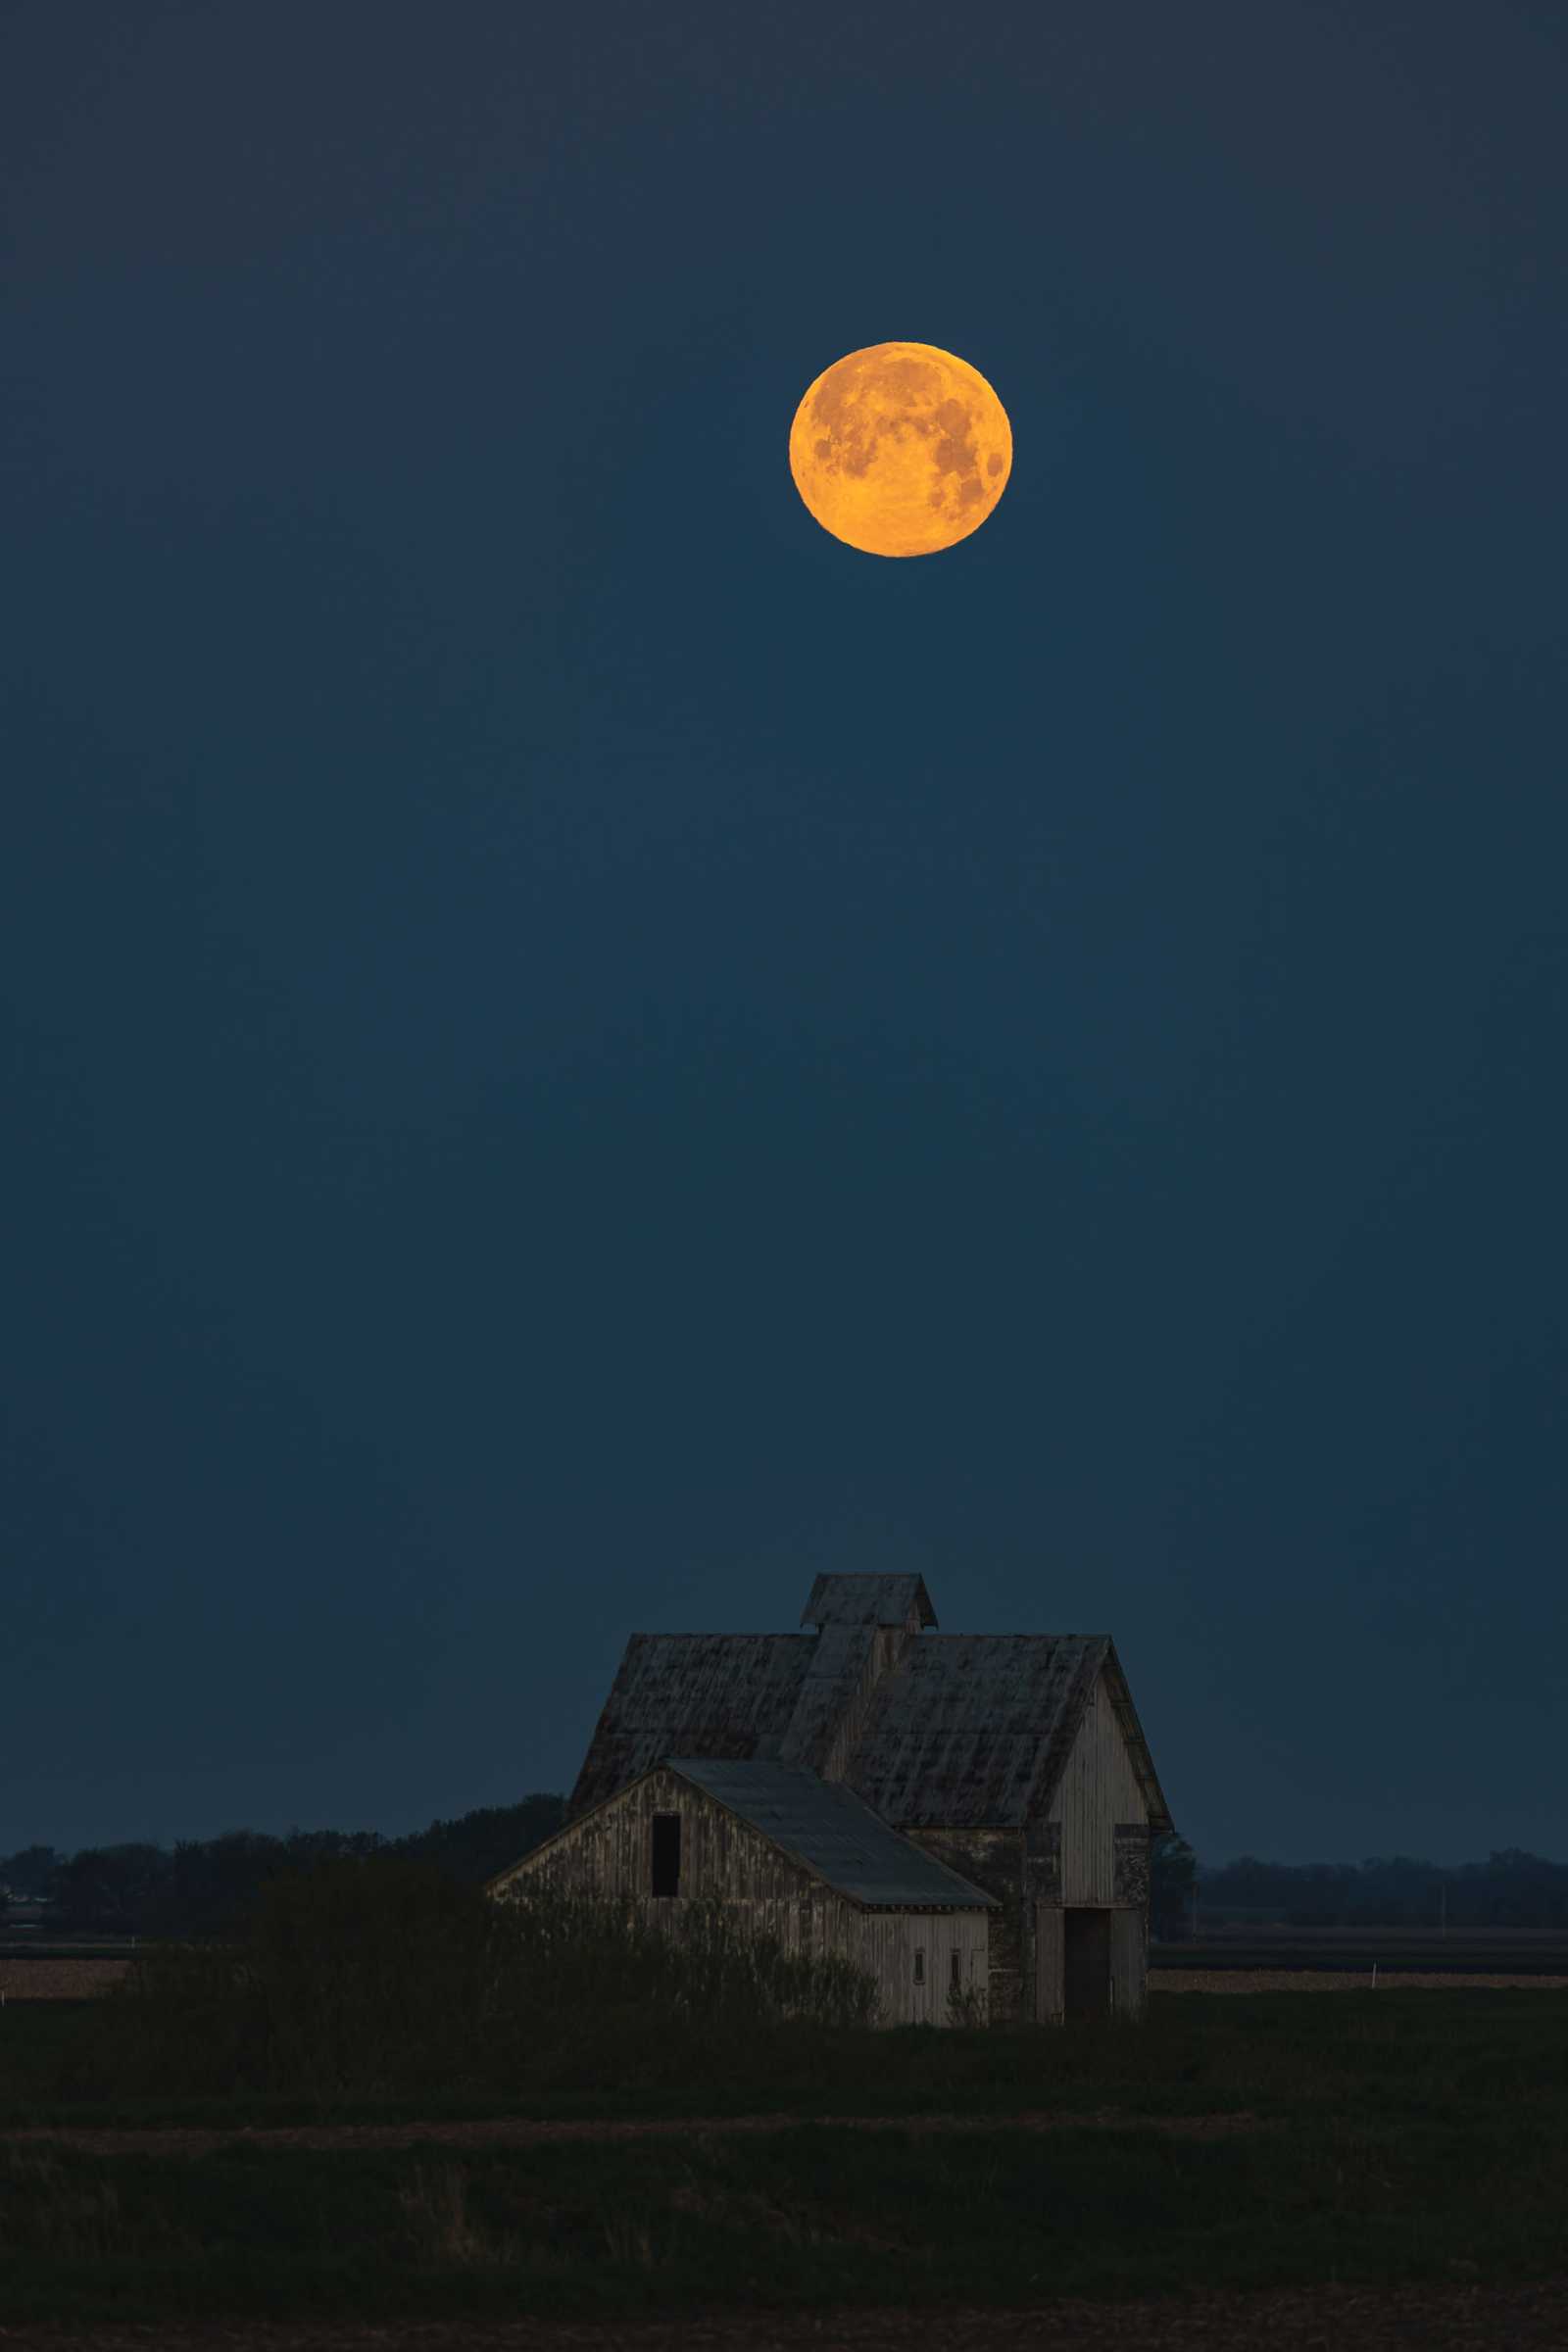 The moon sets as dawn brightens the sky above some farm buildings in a field